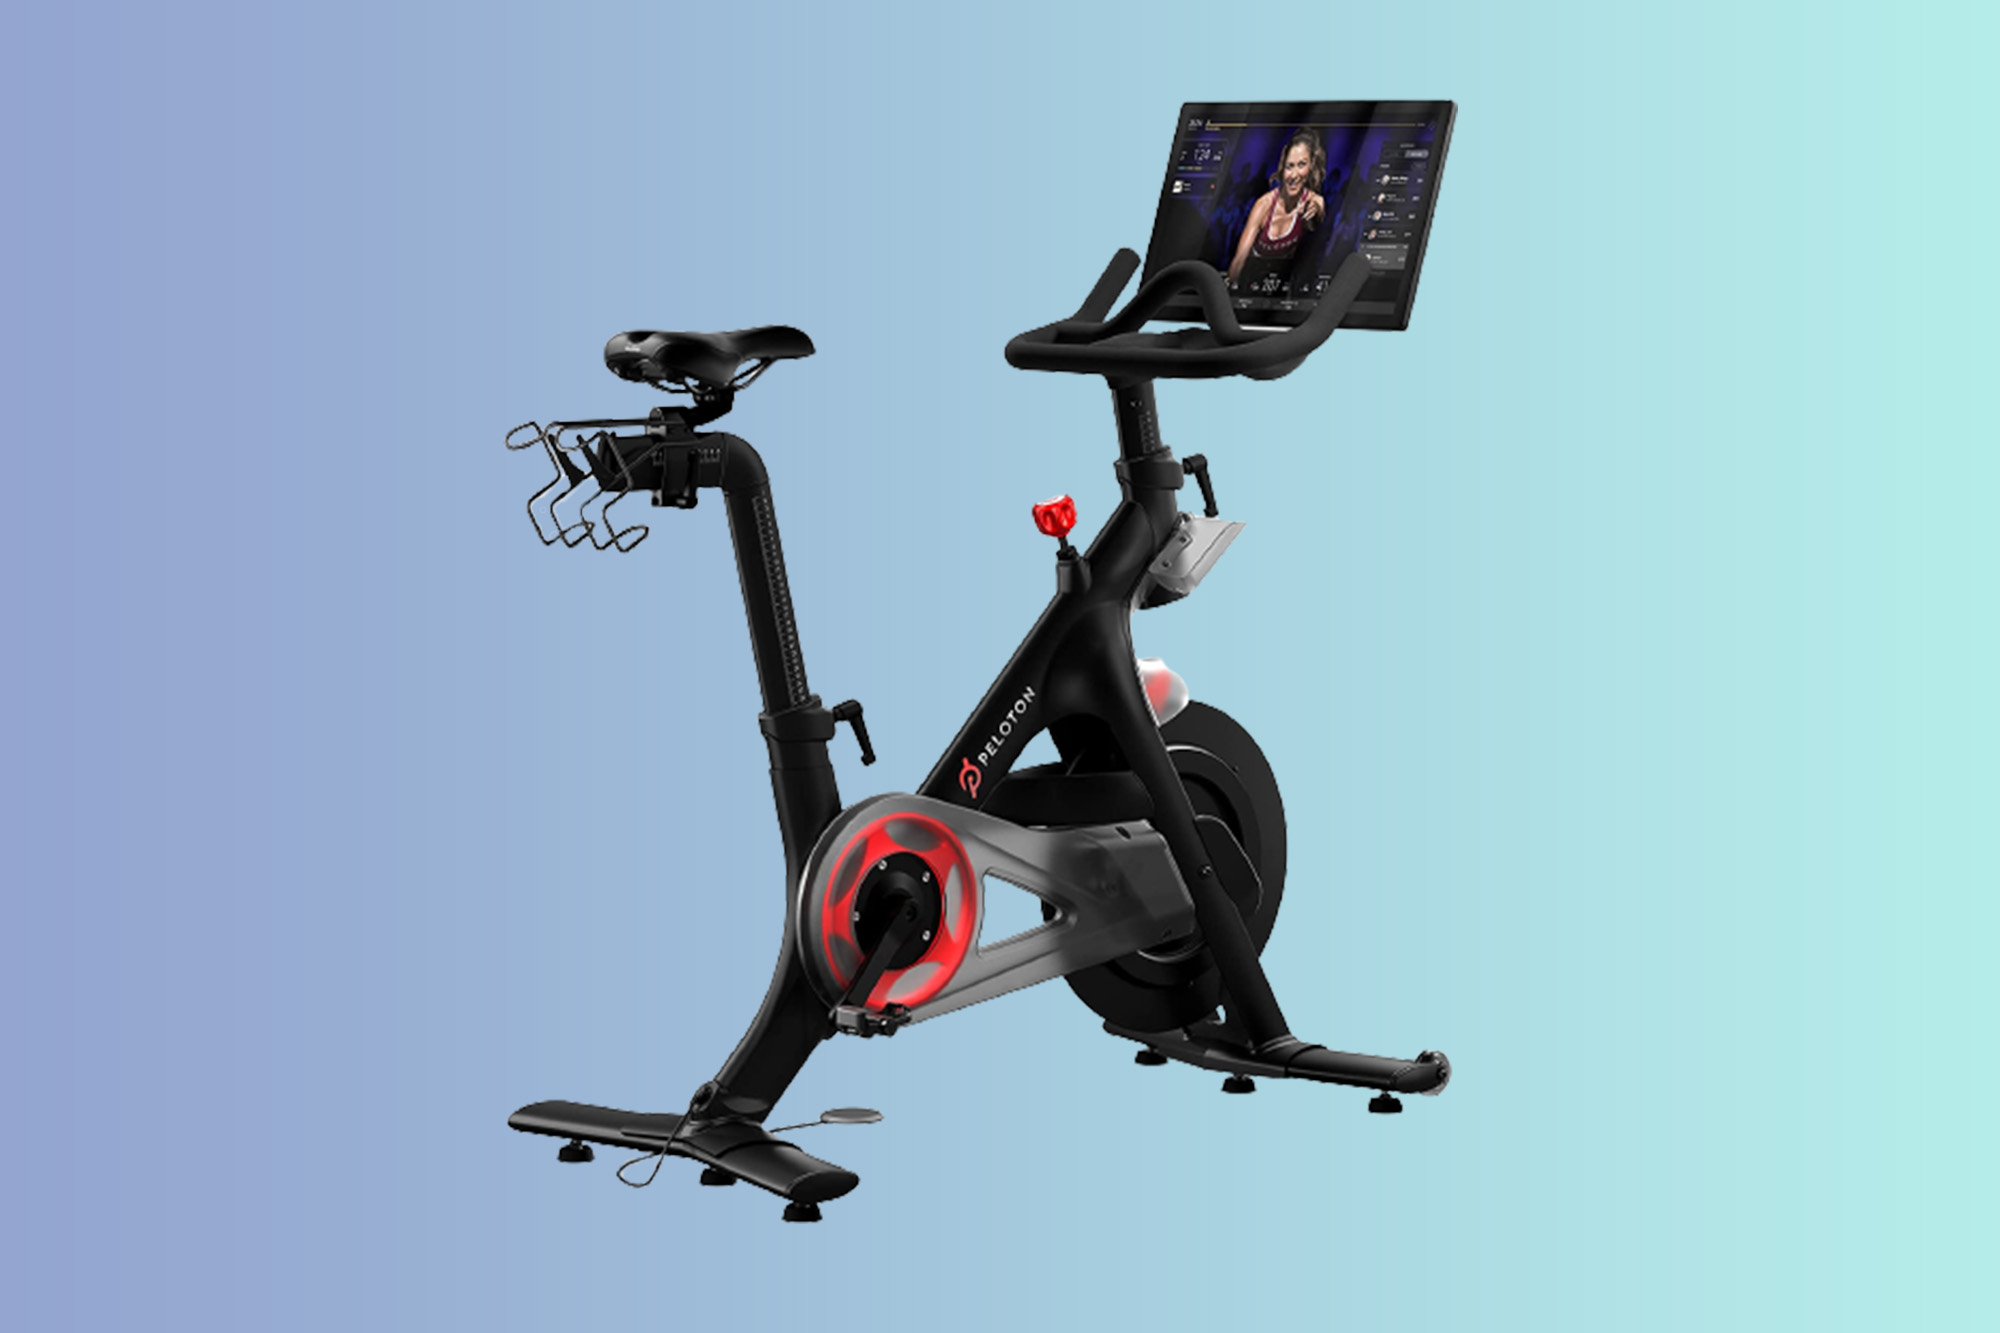 Cyber Monday connected fitness deals: Save $300 off a Peloton bike and more